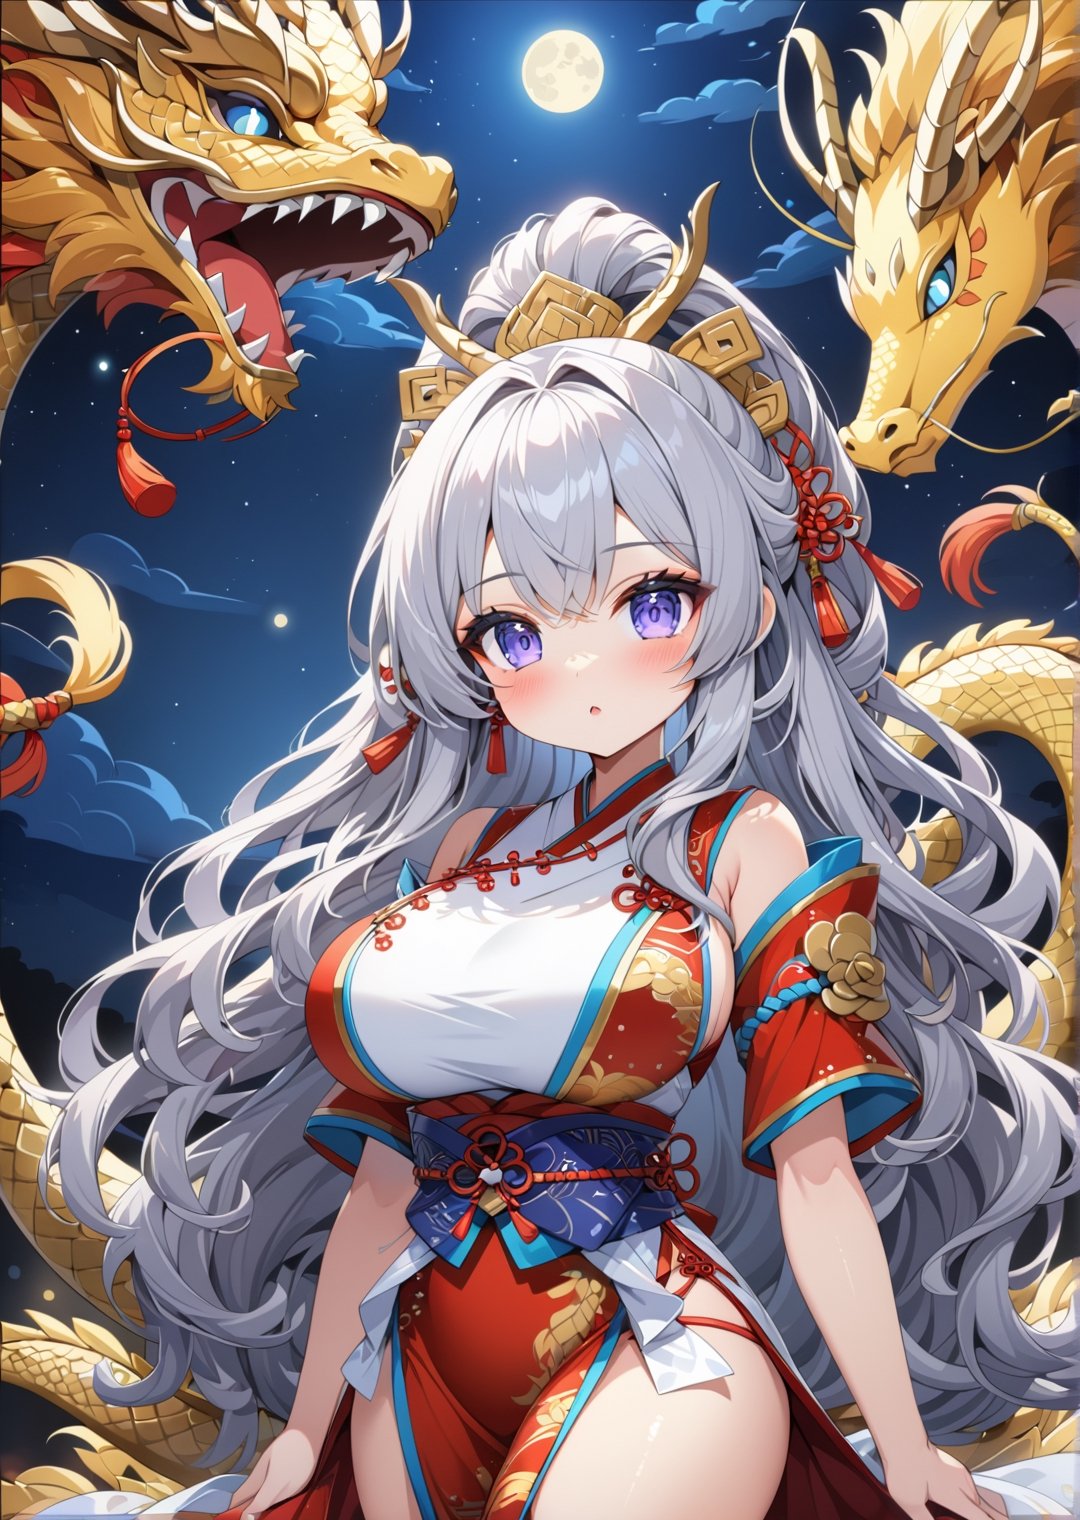 Chibi anime style, 4K, ultra detailed, 1 girl with long hair wearing a traditional Asian dress, large breasts and detail eyes looking at viewers, Golden dragon in the background, more detail XL, SFW,  nighttime, moonlight, 